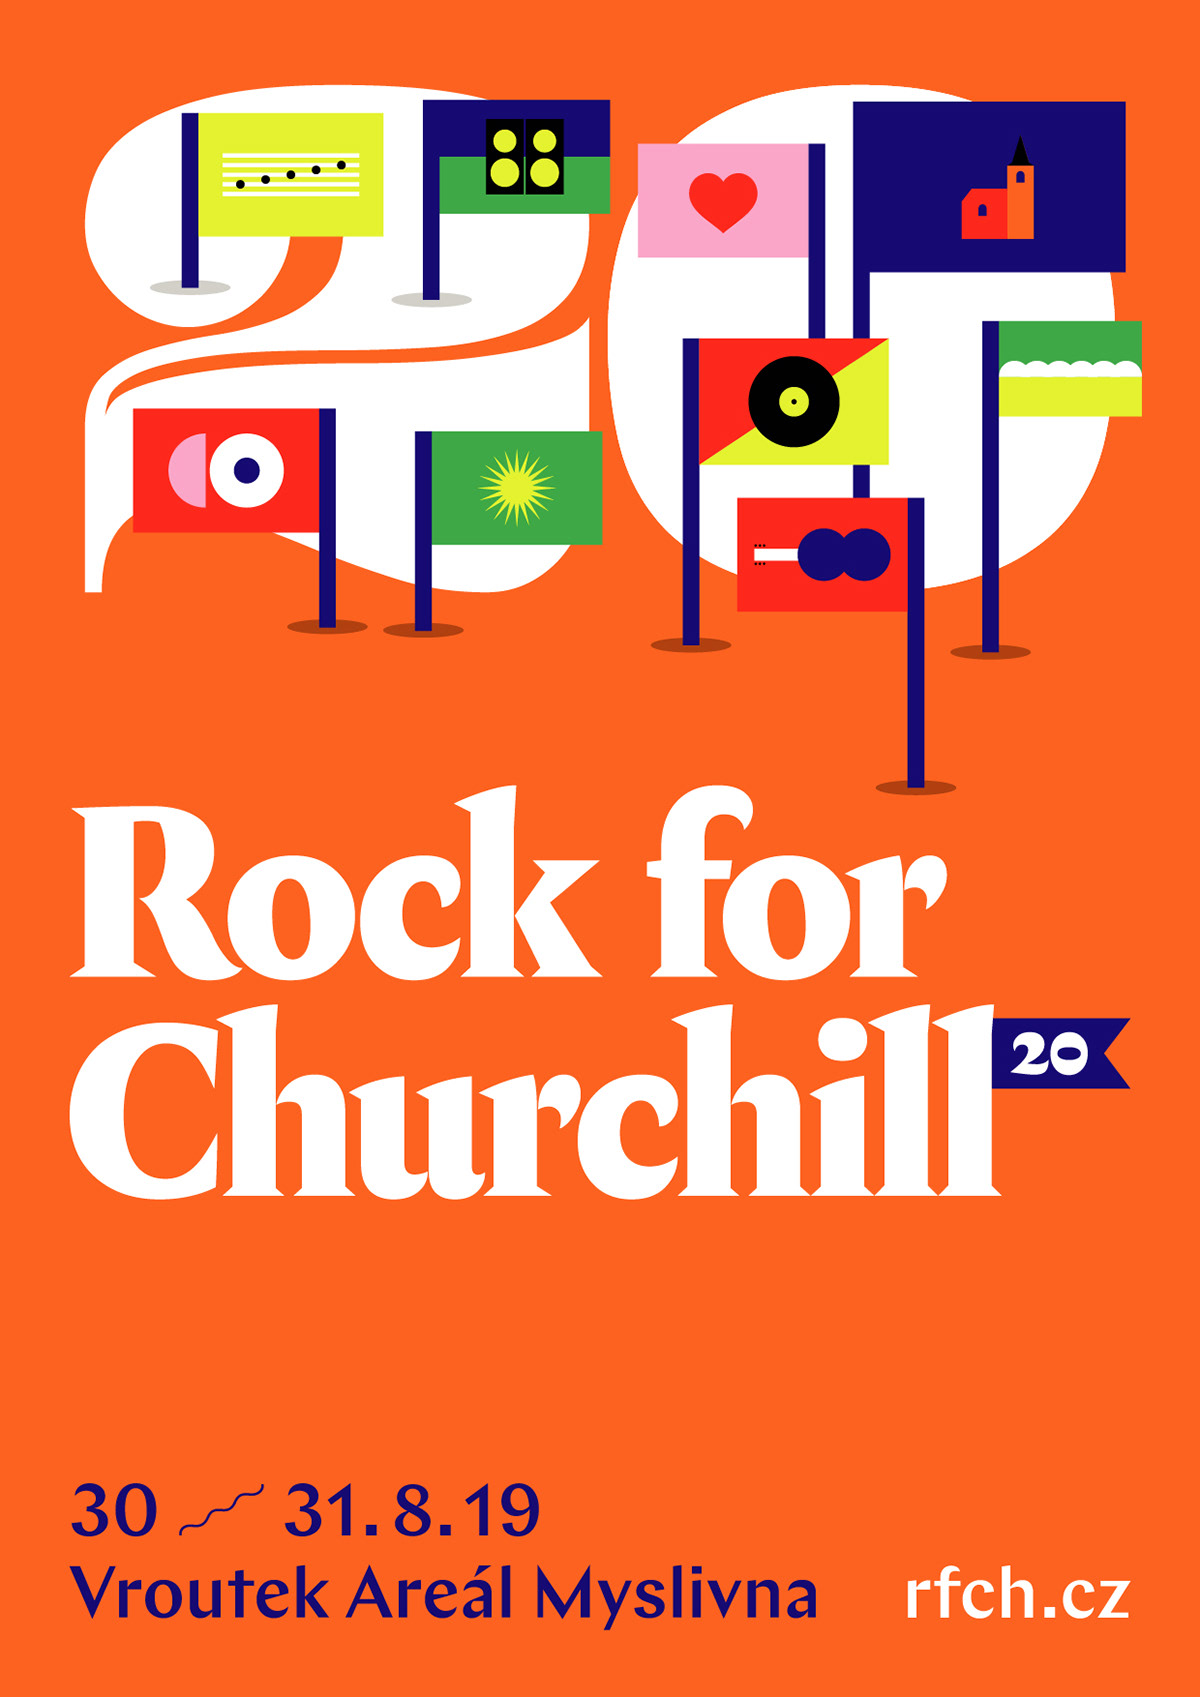 20th anniversary of Rock for Churchill